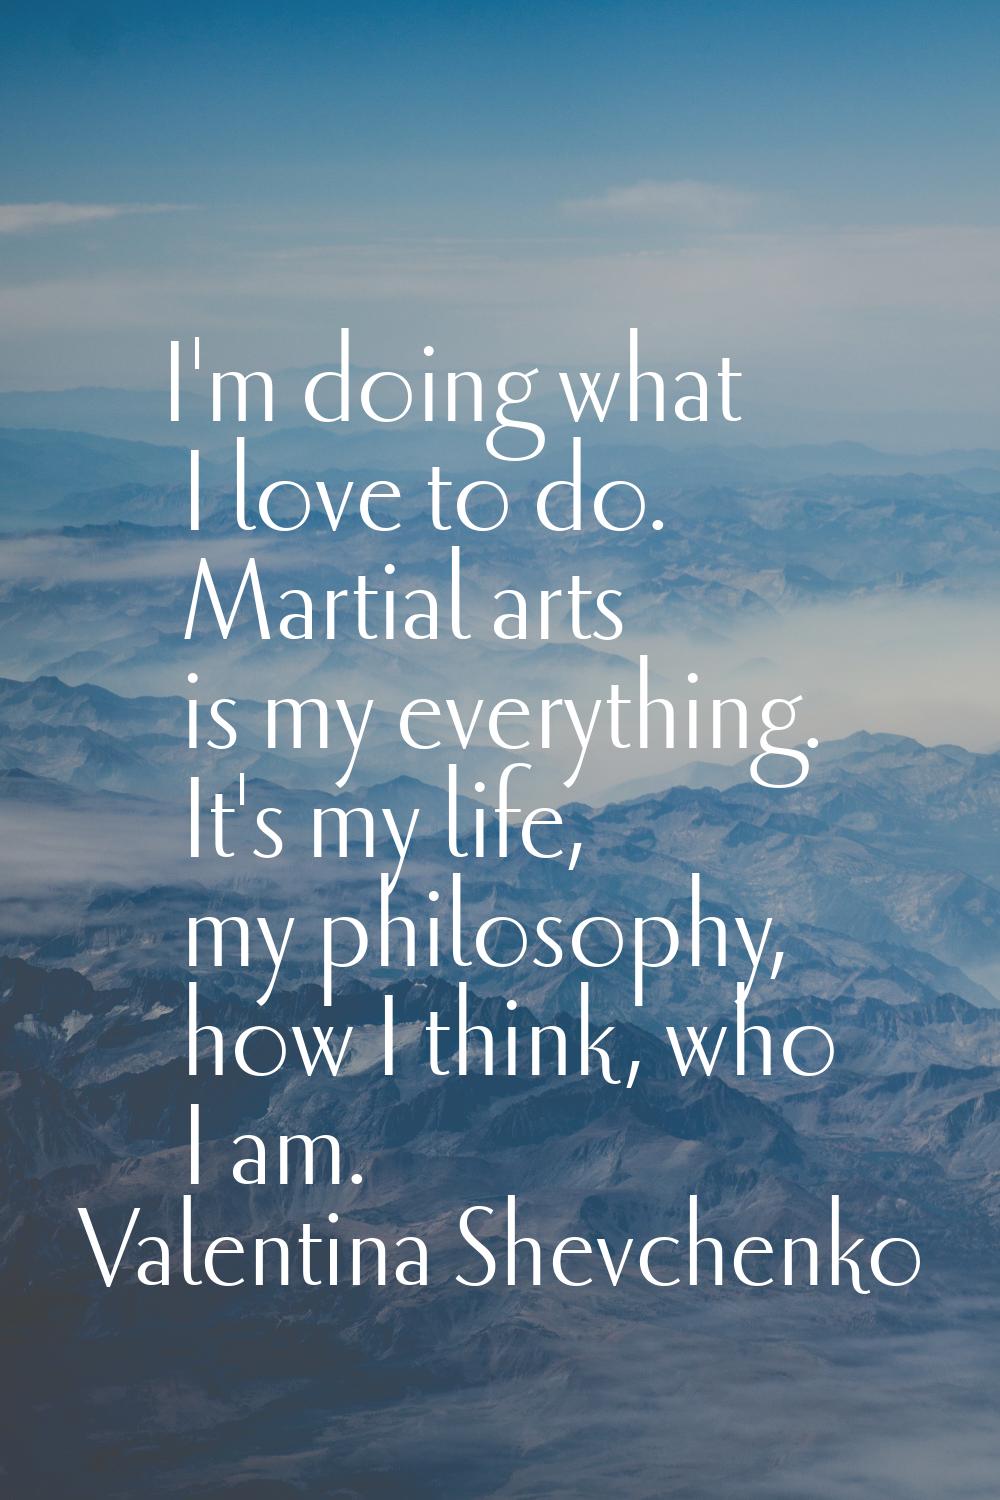 I'm doing what I love to do. Martial arts is my everything. It's my life, my philosophy, how I thin